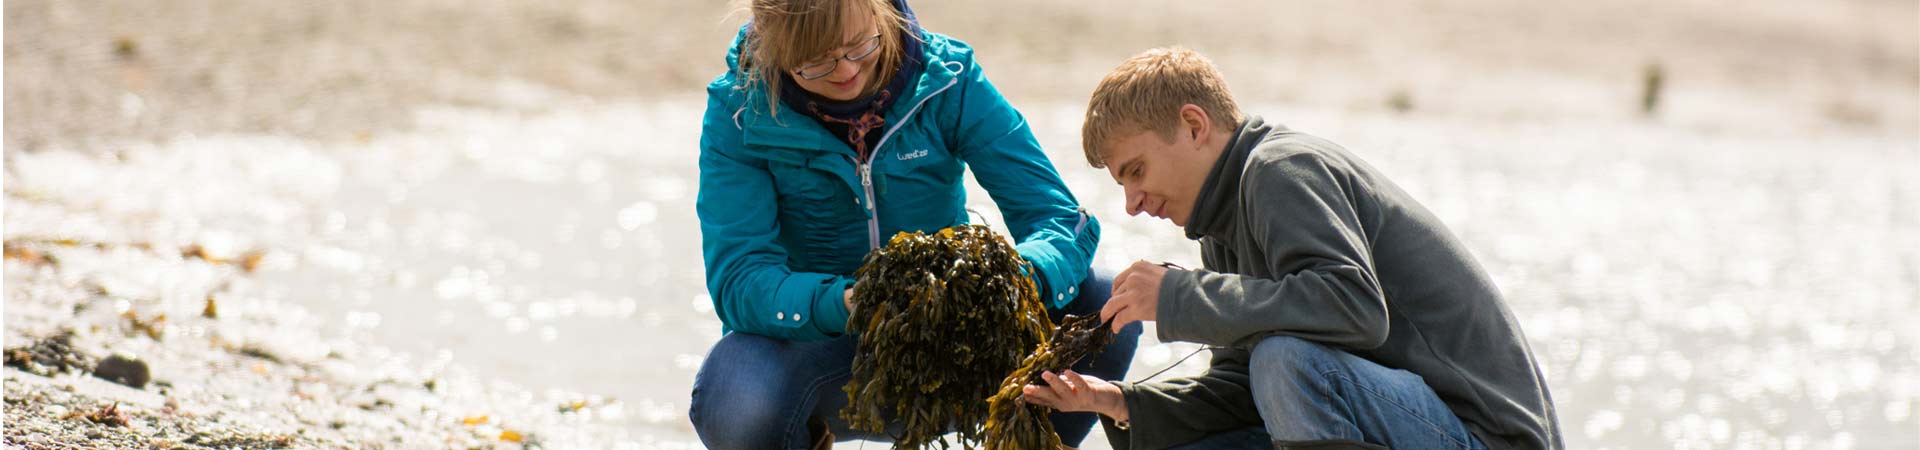 Image showing two students on the shore collecting seaweed